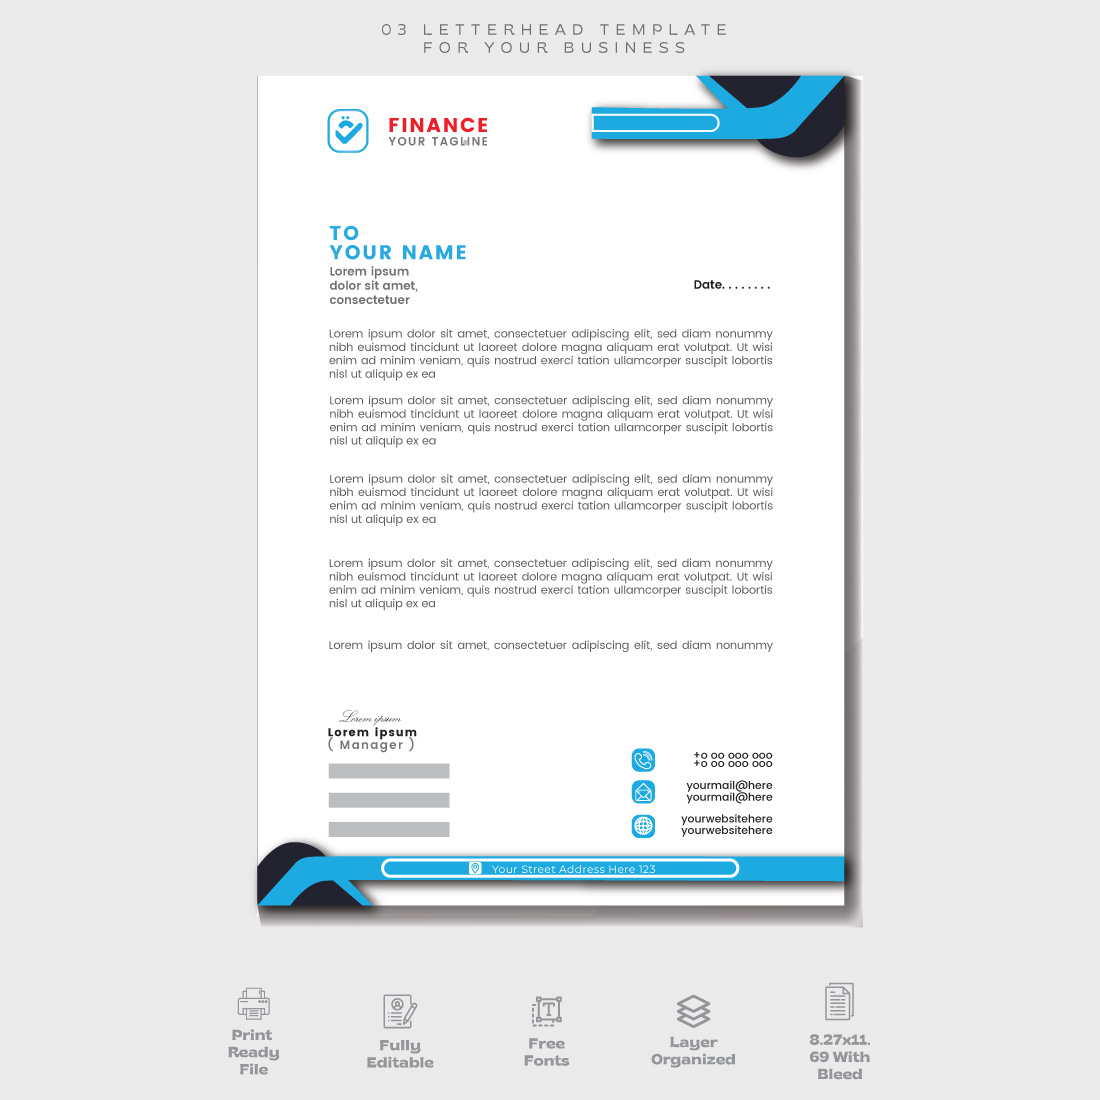 03 Modern letterhead template | Letterhead template design for your businessProfessional Letterhead Template for your Business Very Easy To customize for every file preview image.